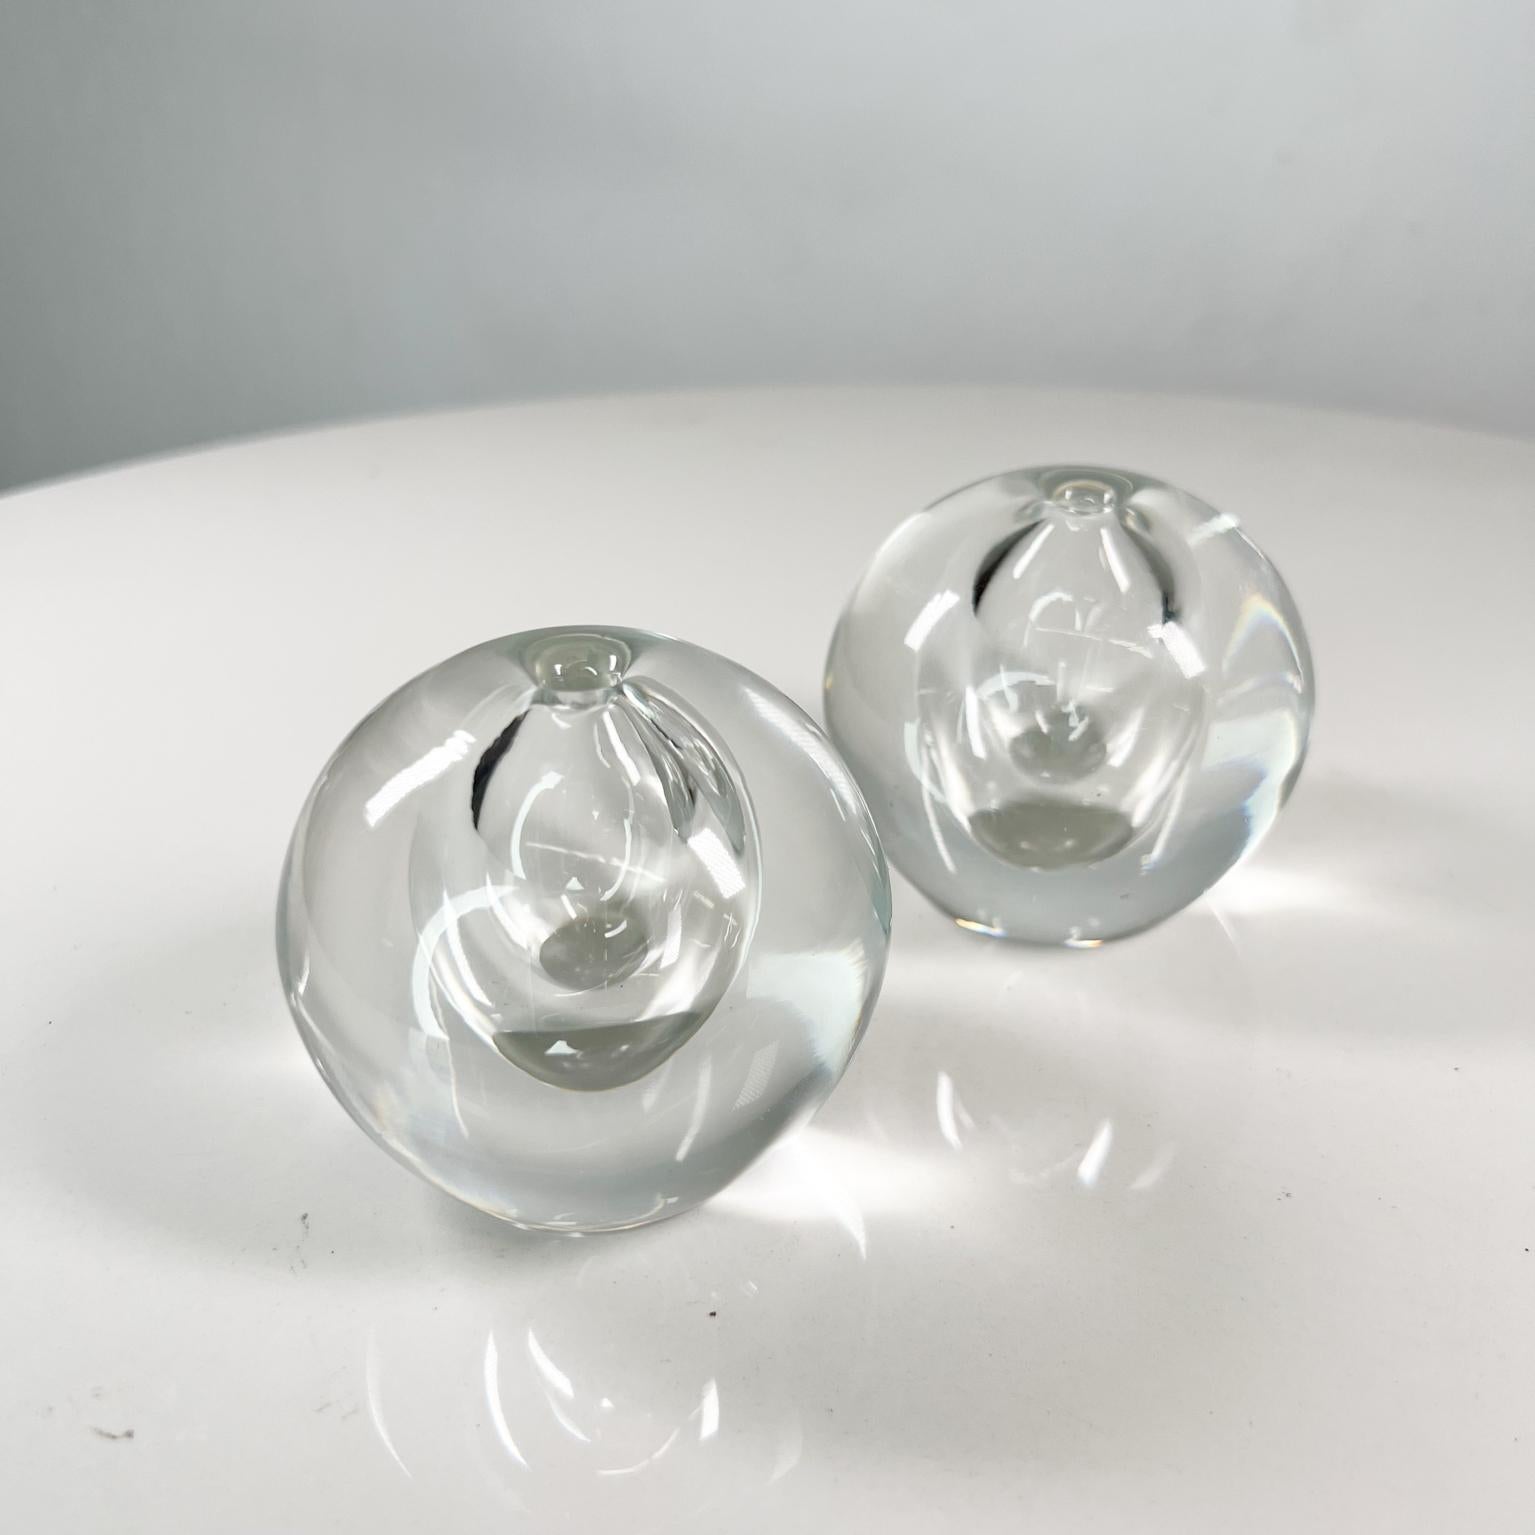 1960s Modern Orb Globe Art Glass vases Style of Rosenthal Studio Line
Unmarked
2.5 tall x 2.75 diameter
Original vintage unrestored preowned condition
See images provided.
 